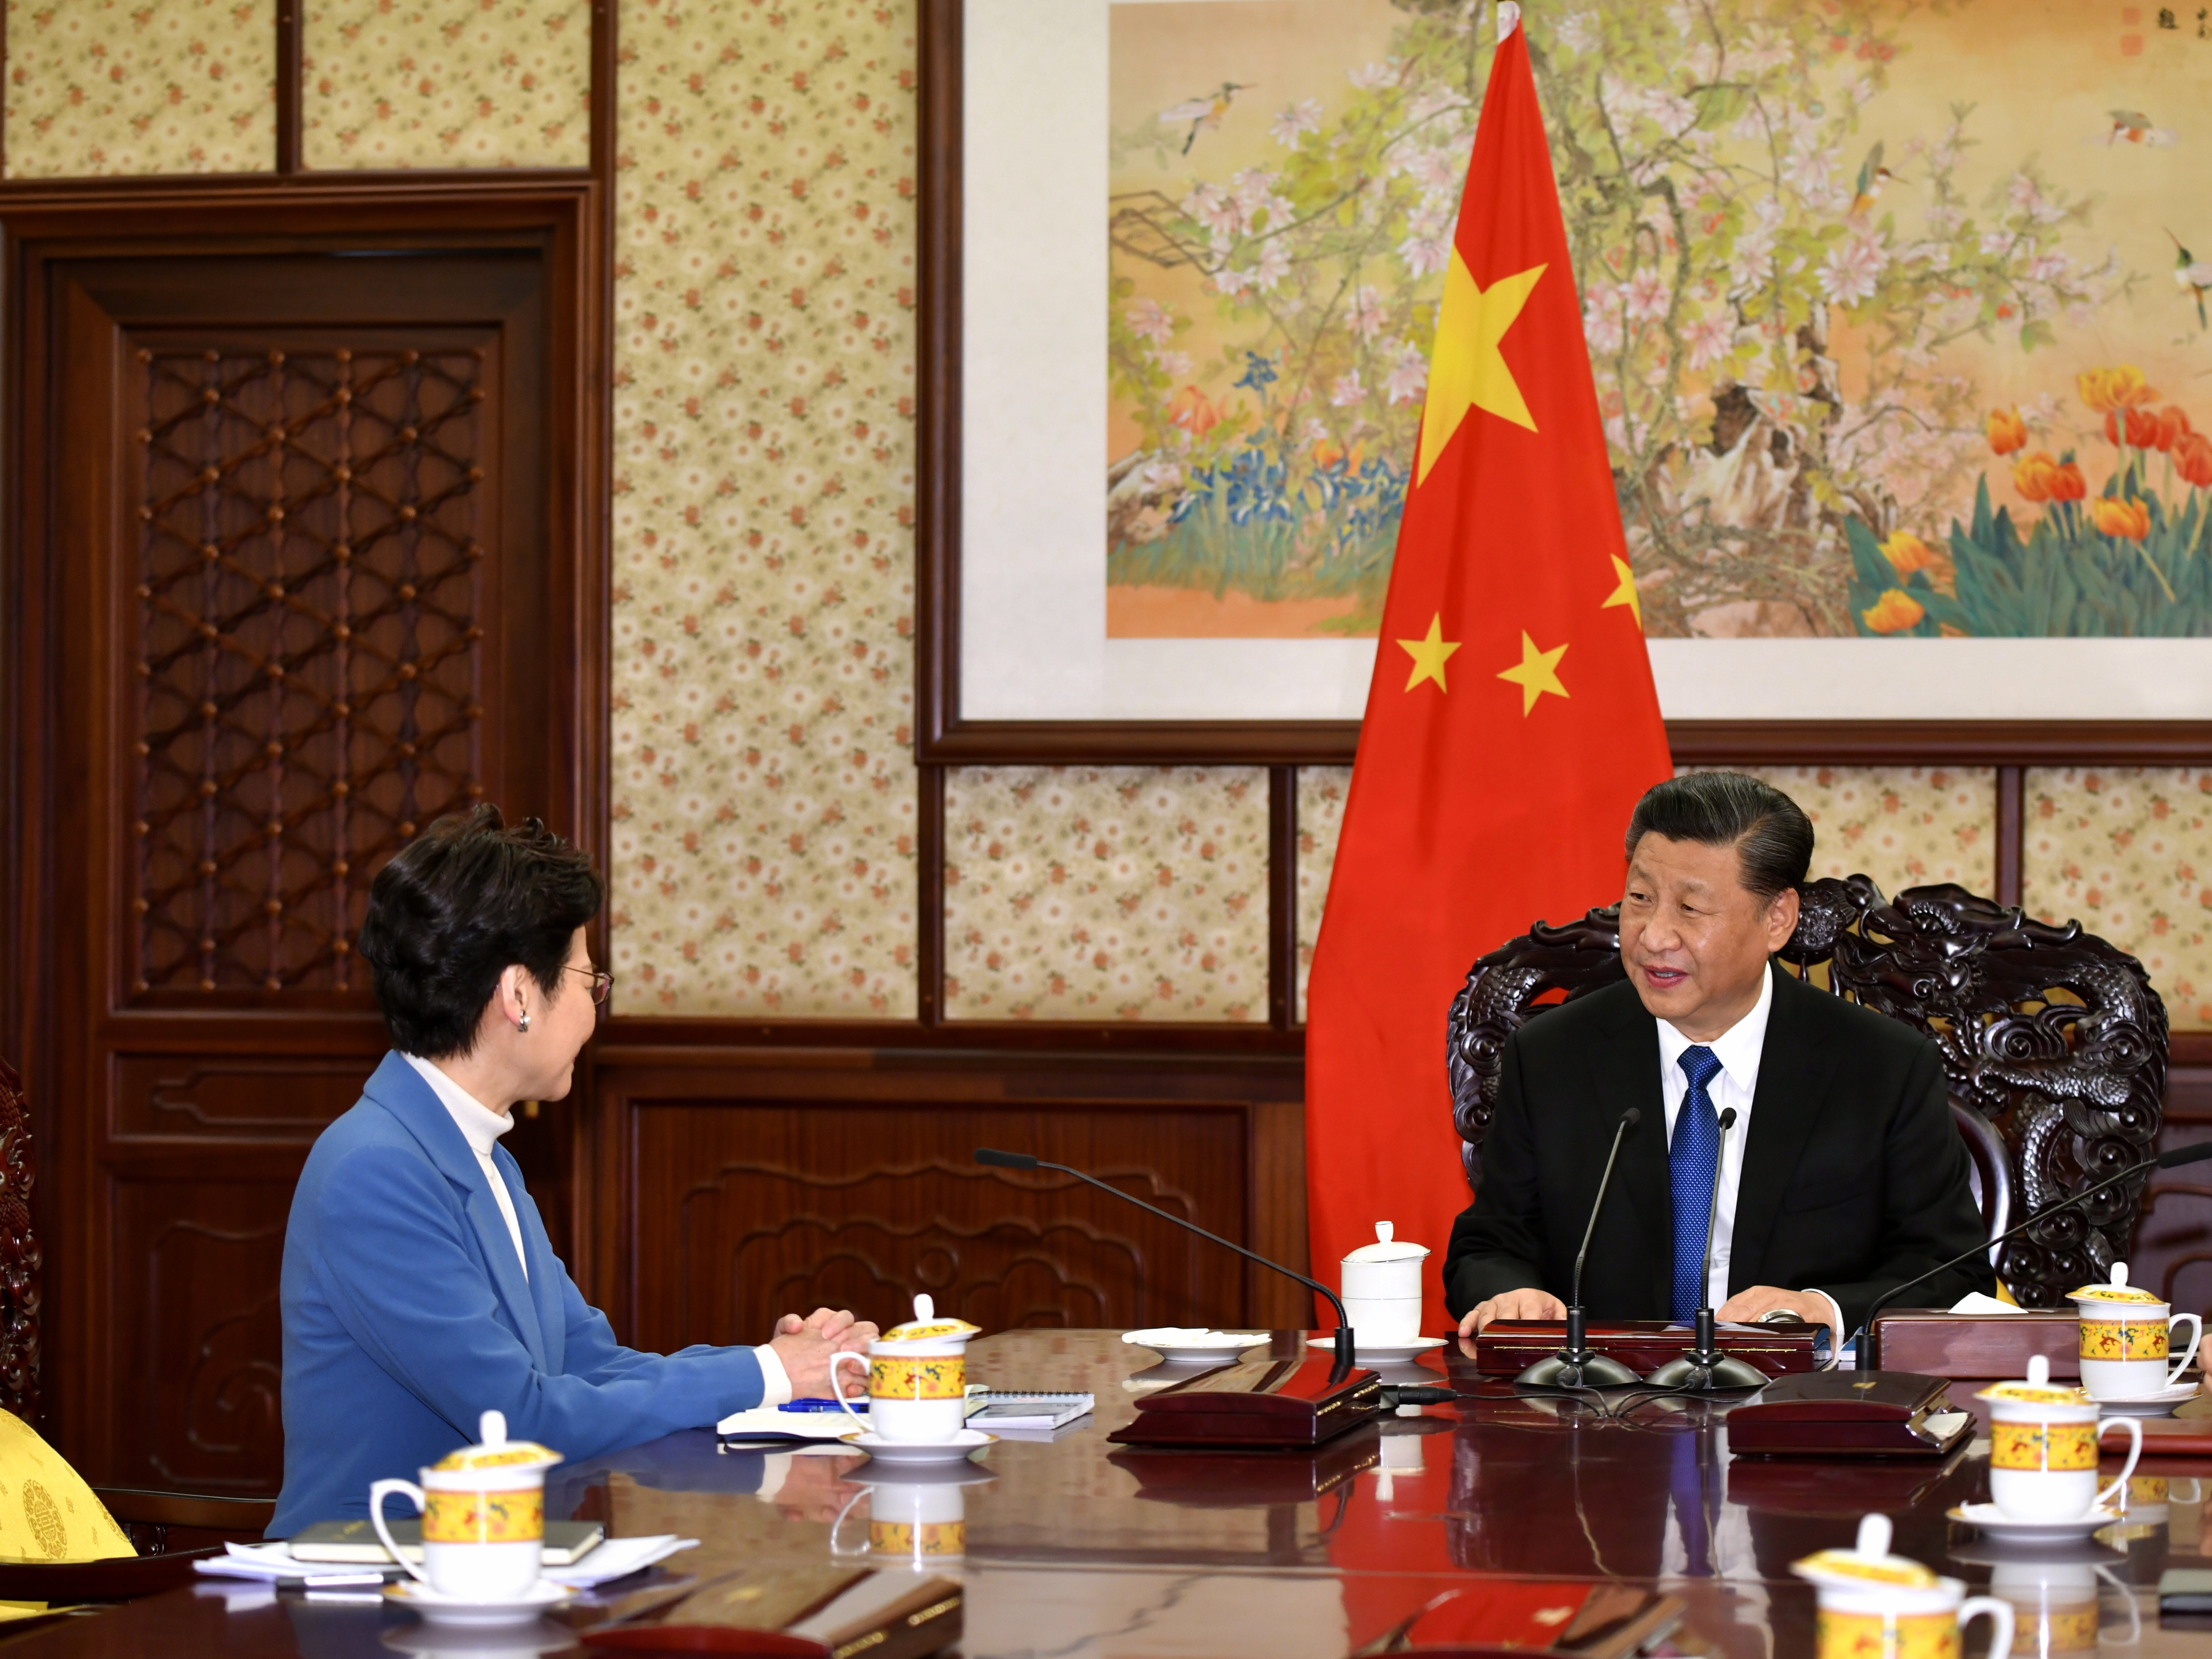 Carrie Lam sits down with Xi Jinping during last year’s annual visit to Beijing. Photo: ISD